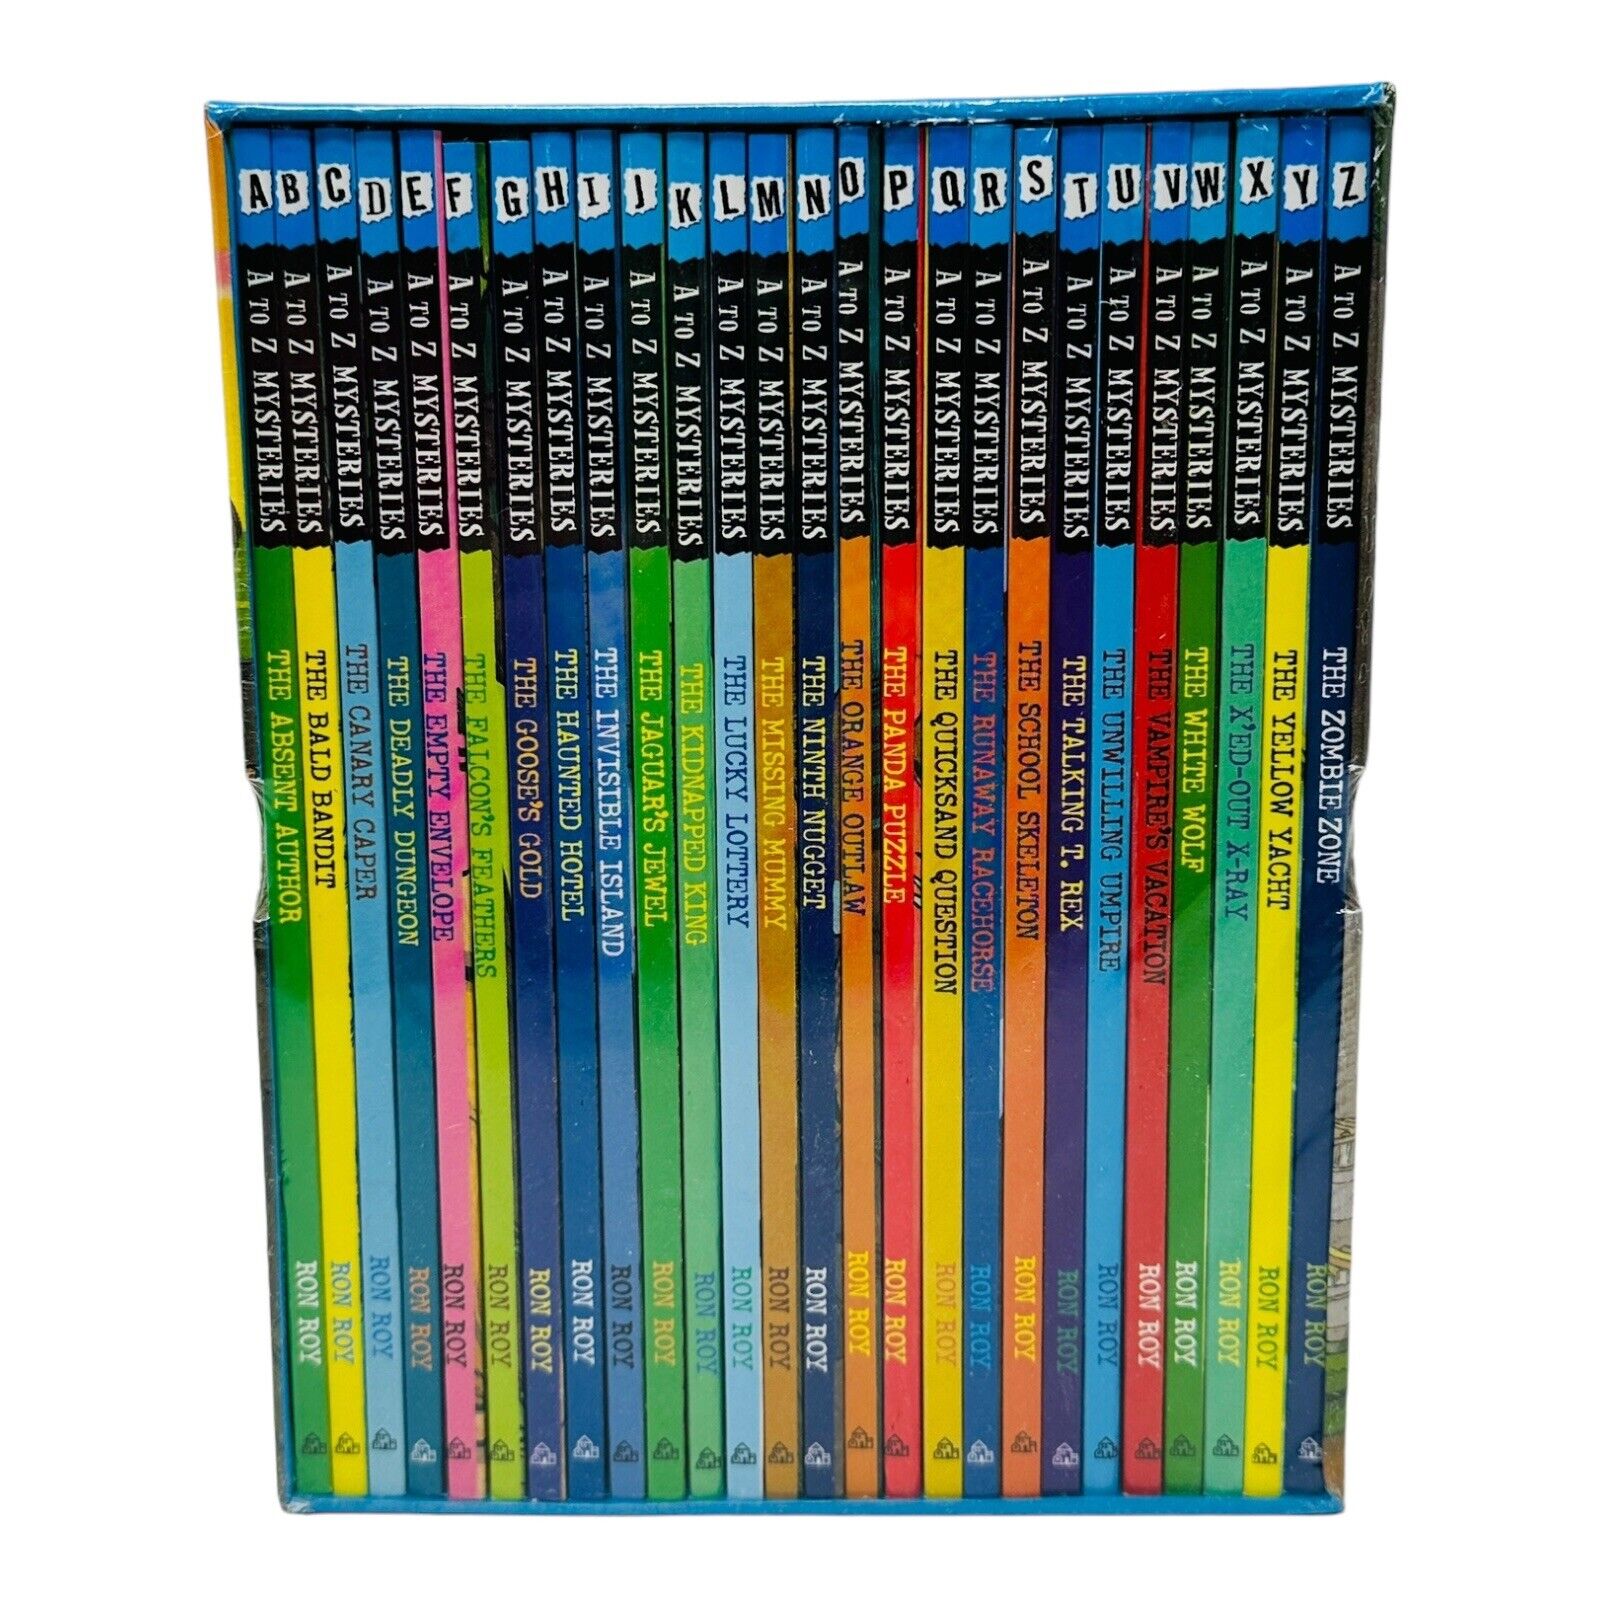 NEW A to Z Mysteries The Complete Collection by Ron Roy 1-26 Book Set Paperback